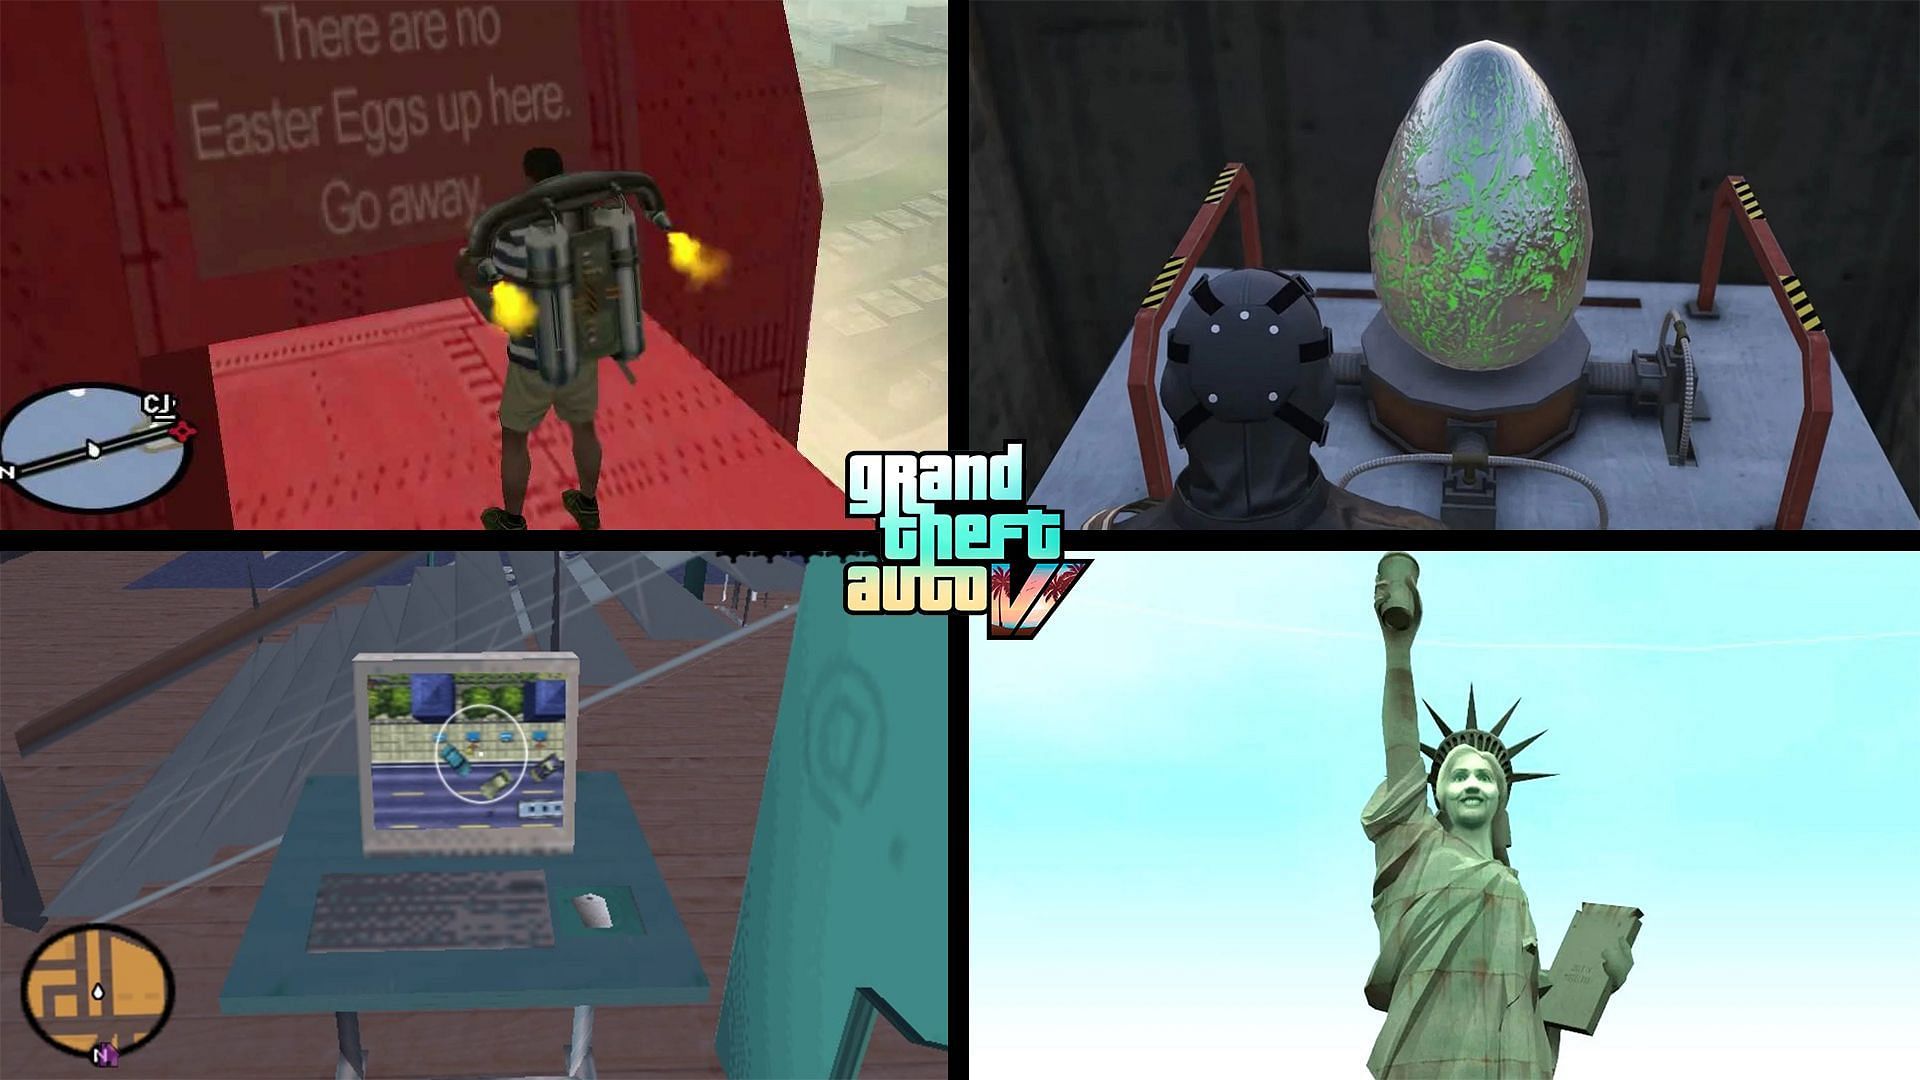 The GTA Series is known for hiding Easter Eggs in games, fans still discover new ones (Image via Sportskeeda)